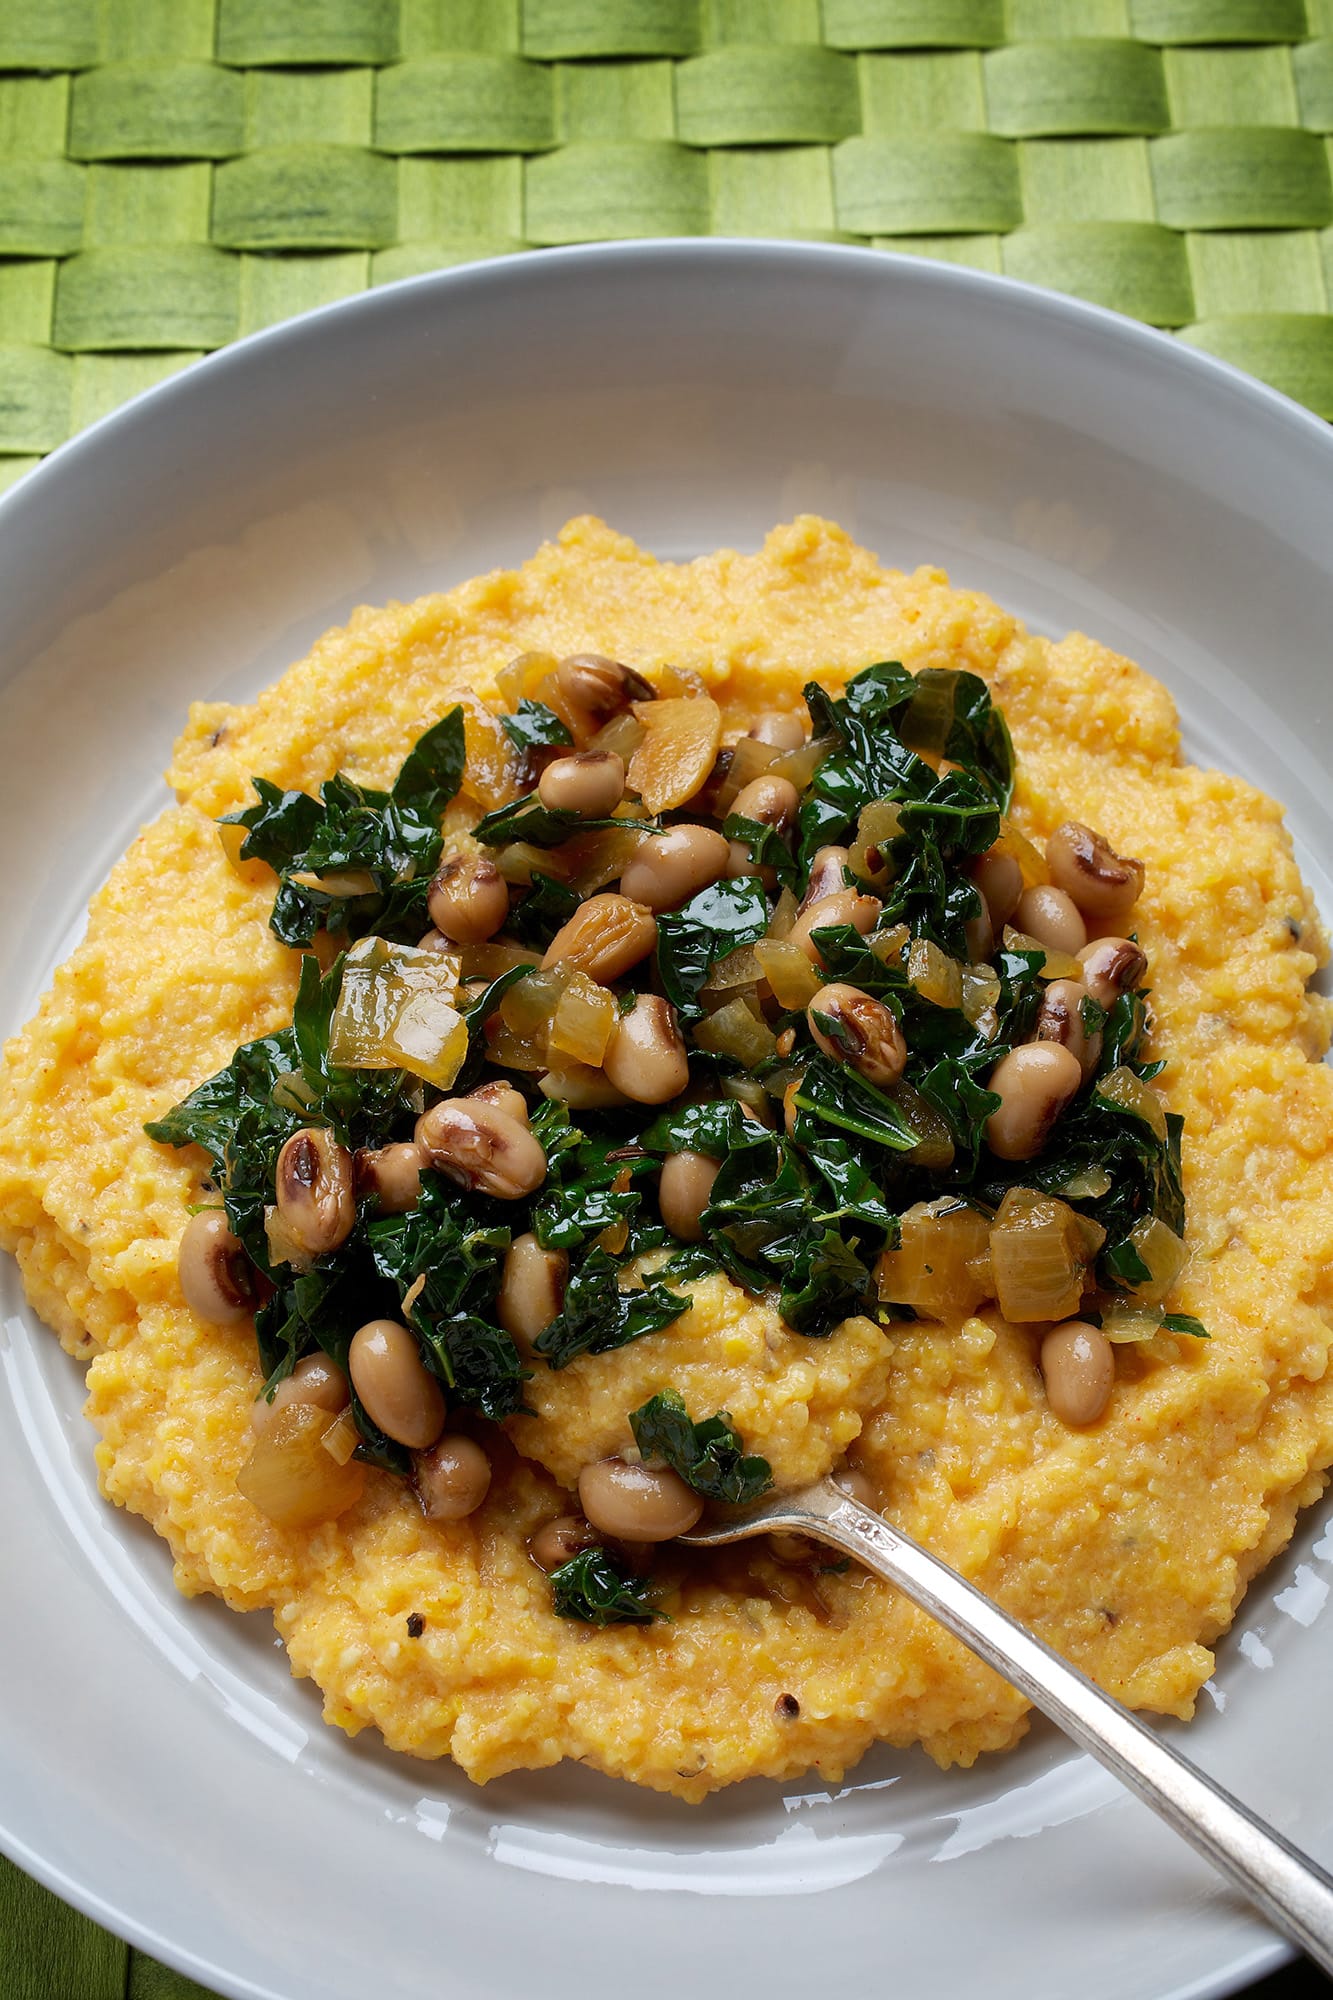 Kale pairs with black-eyed peas and smoky grits for a hearty dish with a Southern twist.